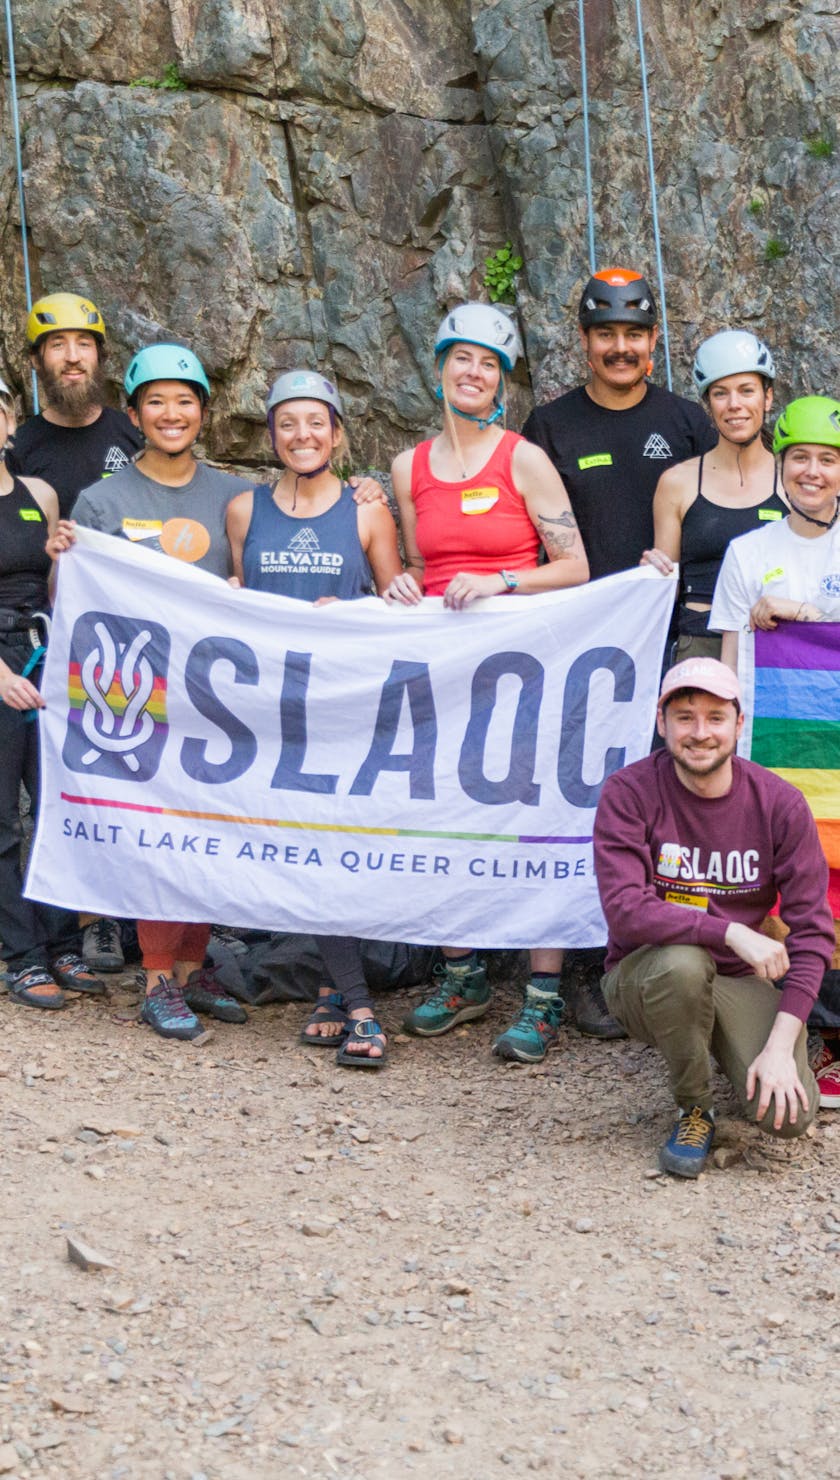 SLAQC. A group of climbers holding a flag for SLAQC and PRIDE.